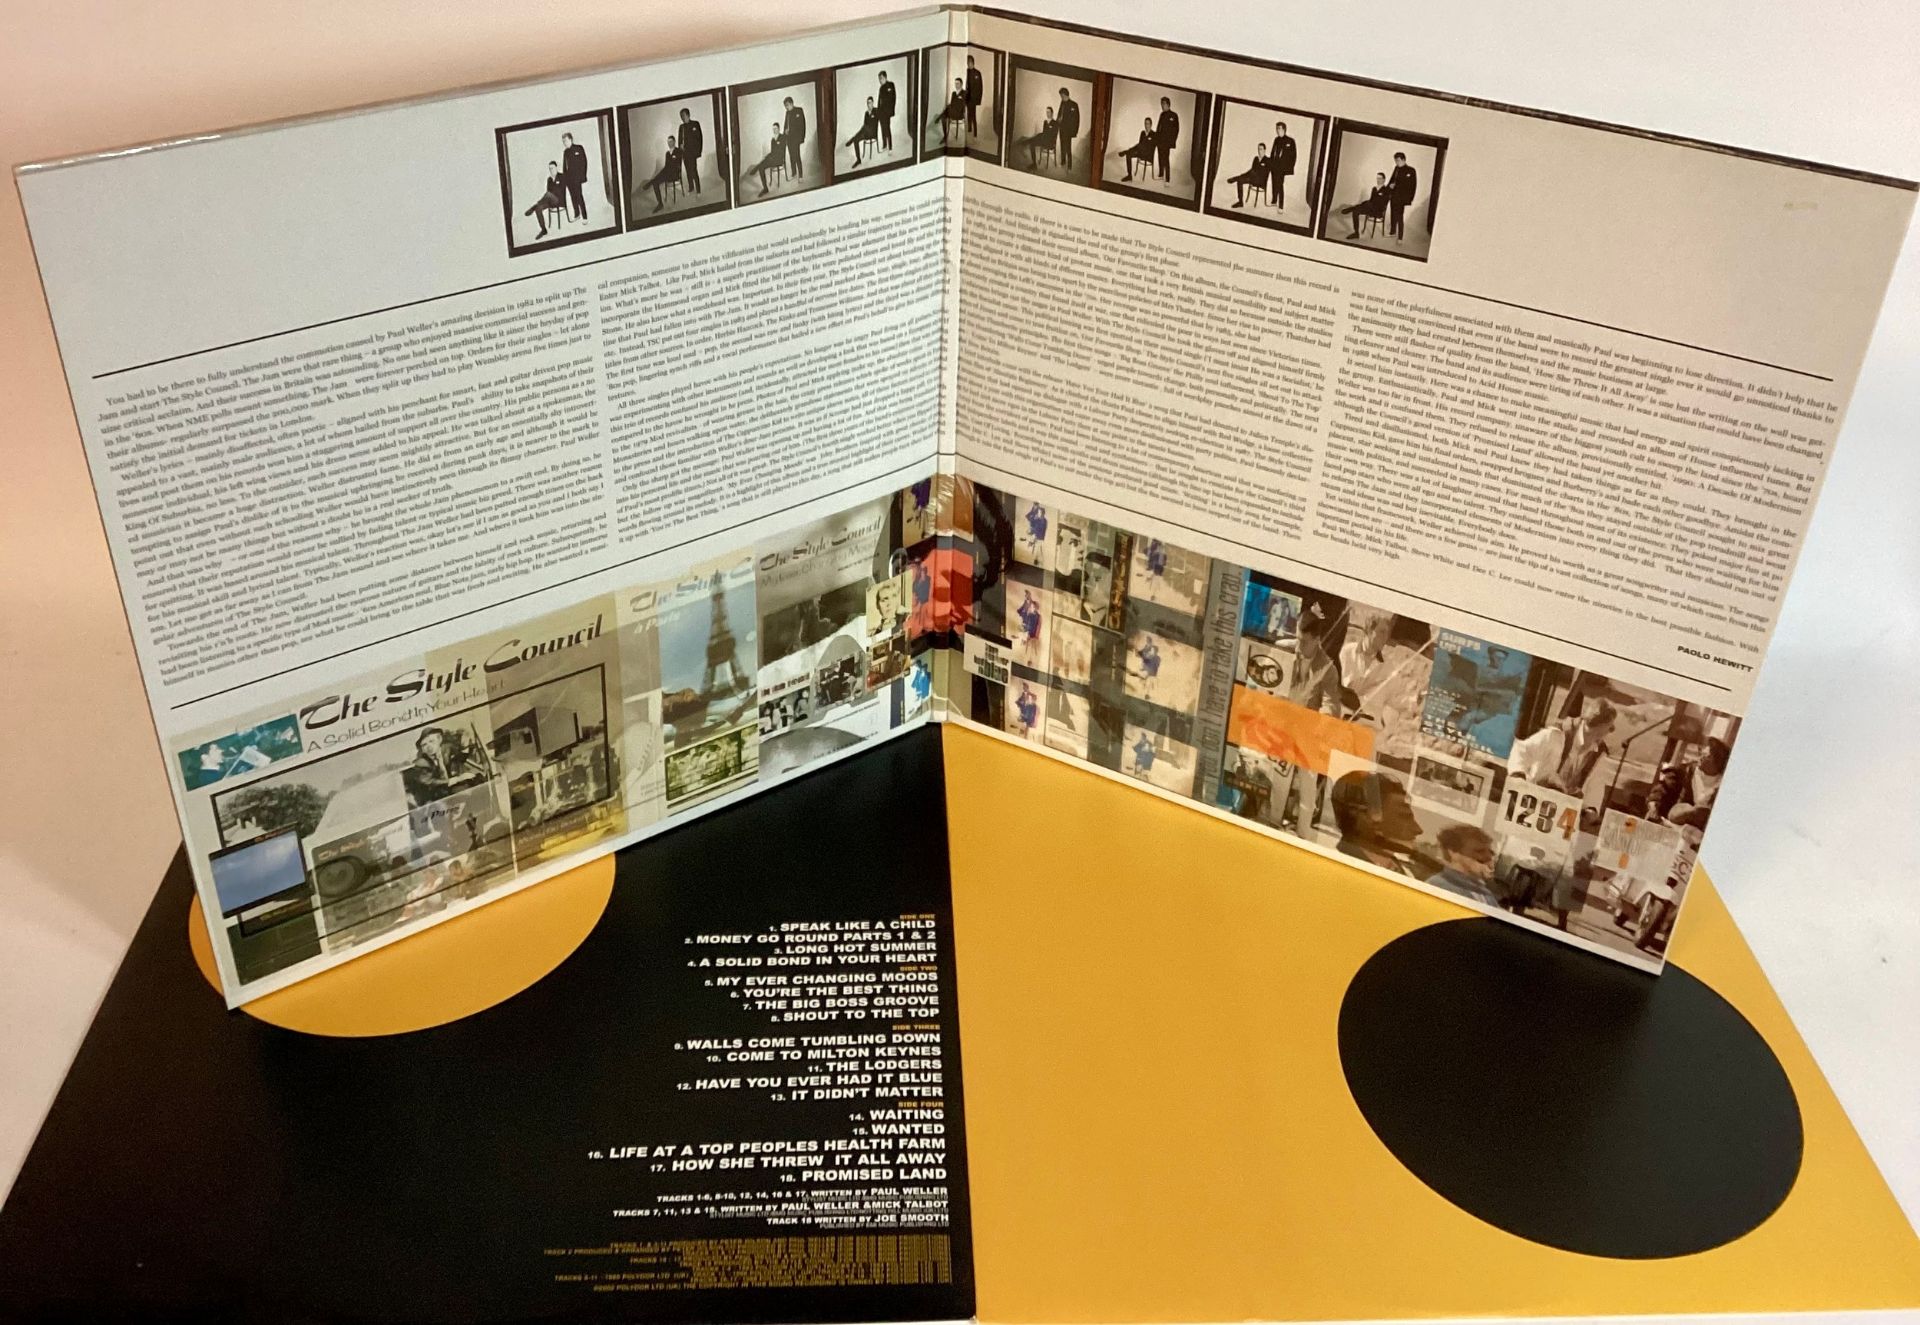 THE STYLE COUNCIL 'GREATEST HITS' DOUBLE VINYL ALBUM. A Polydor Records 549134-1 release from - Image 3 of 3